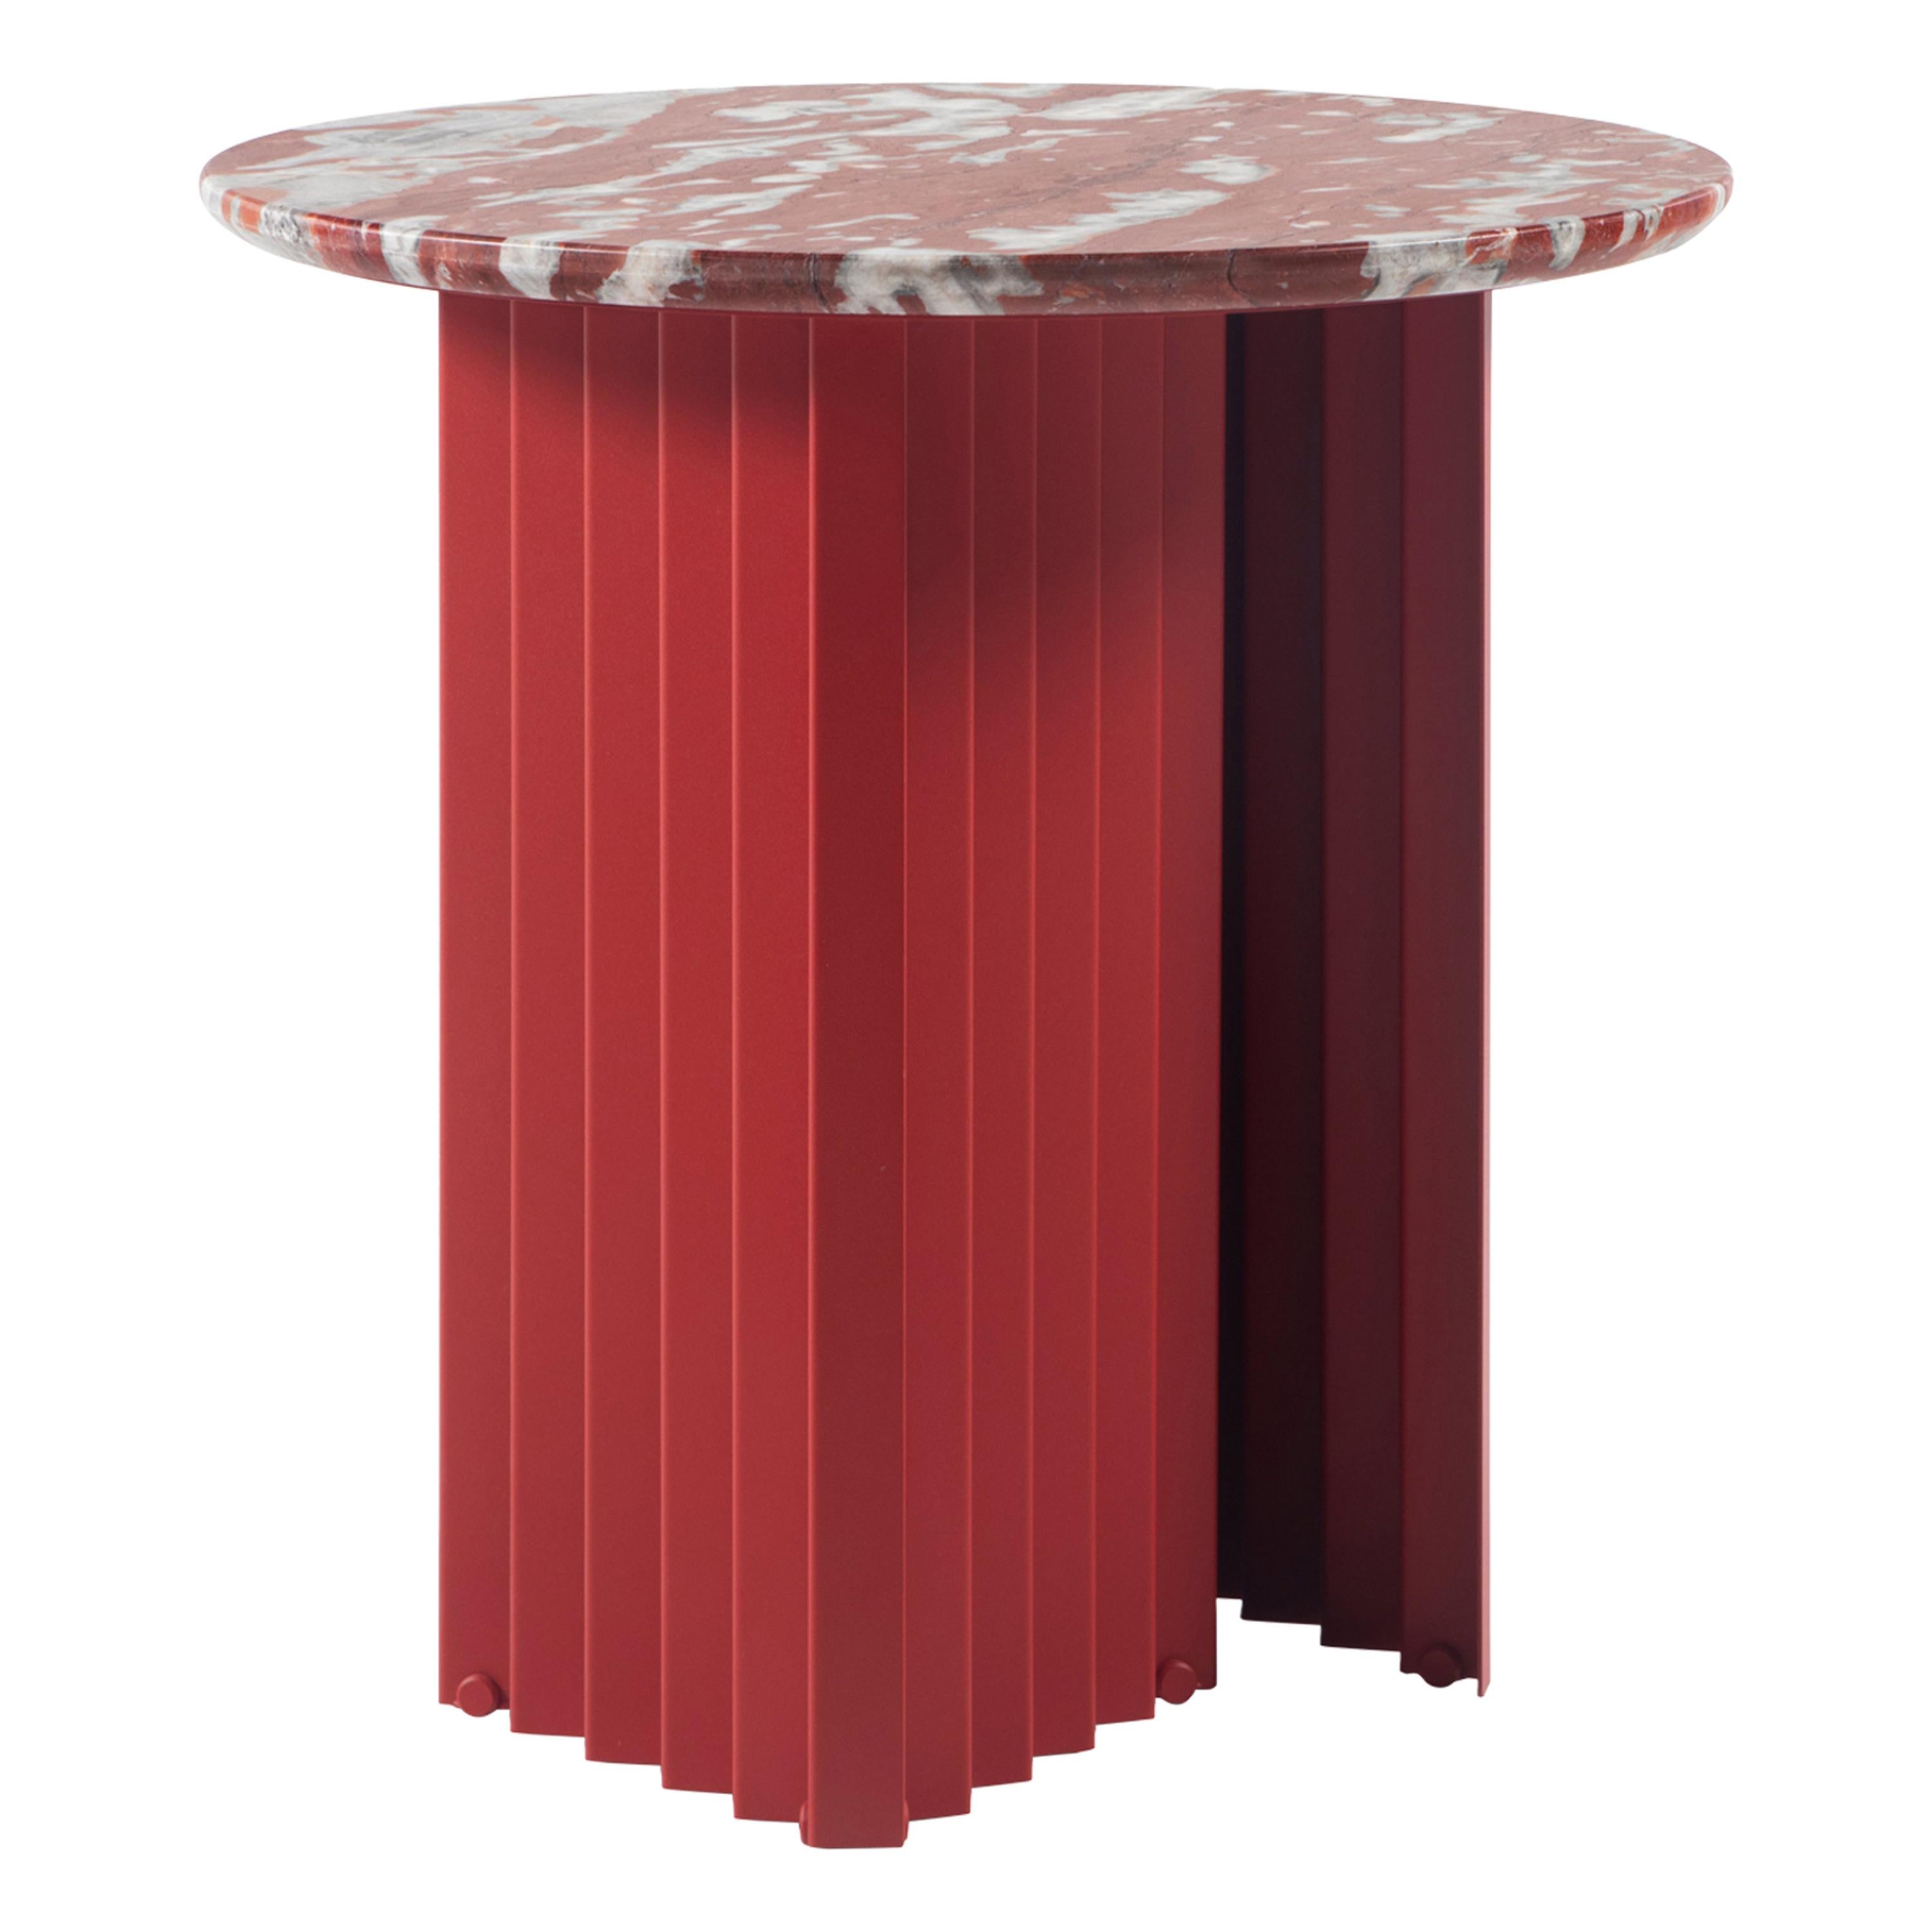 Plec is a collection of coffee and side tables that are as happy together as they are alone. With their accordion-shaped legs, these Plec round tables love creating light and shade effects at any time of day. The Plec table has a steel structure